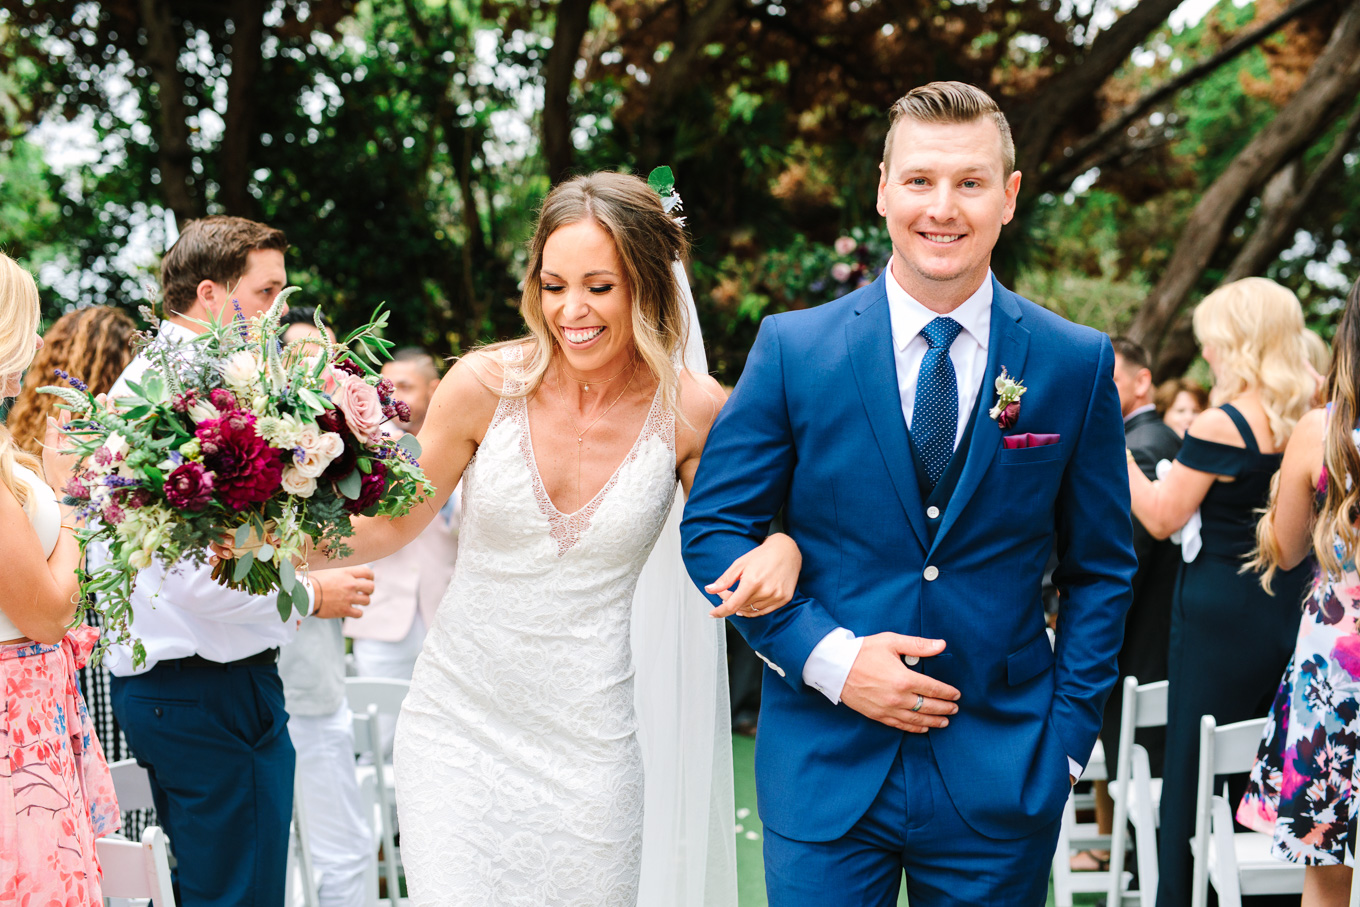 Bride and groom leaving ceremony at San Diego Botanic Garden wedding | Best Southern California Garden Wedding Venues | Colorful and elevated wedding photography for fun-loving couples | #gardenvenue #weddingvenue #socalweddingvenue #bouquetideas #uniquebouquet   Source: Mary Costa Photography | Los Angeles 